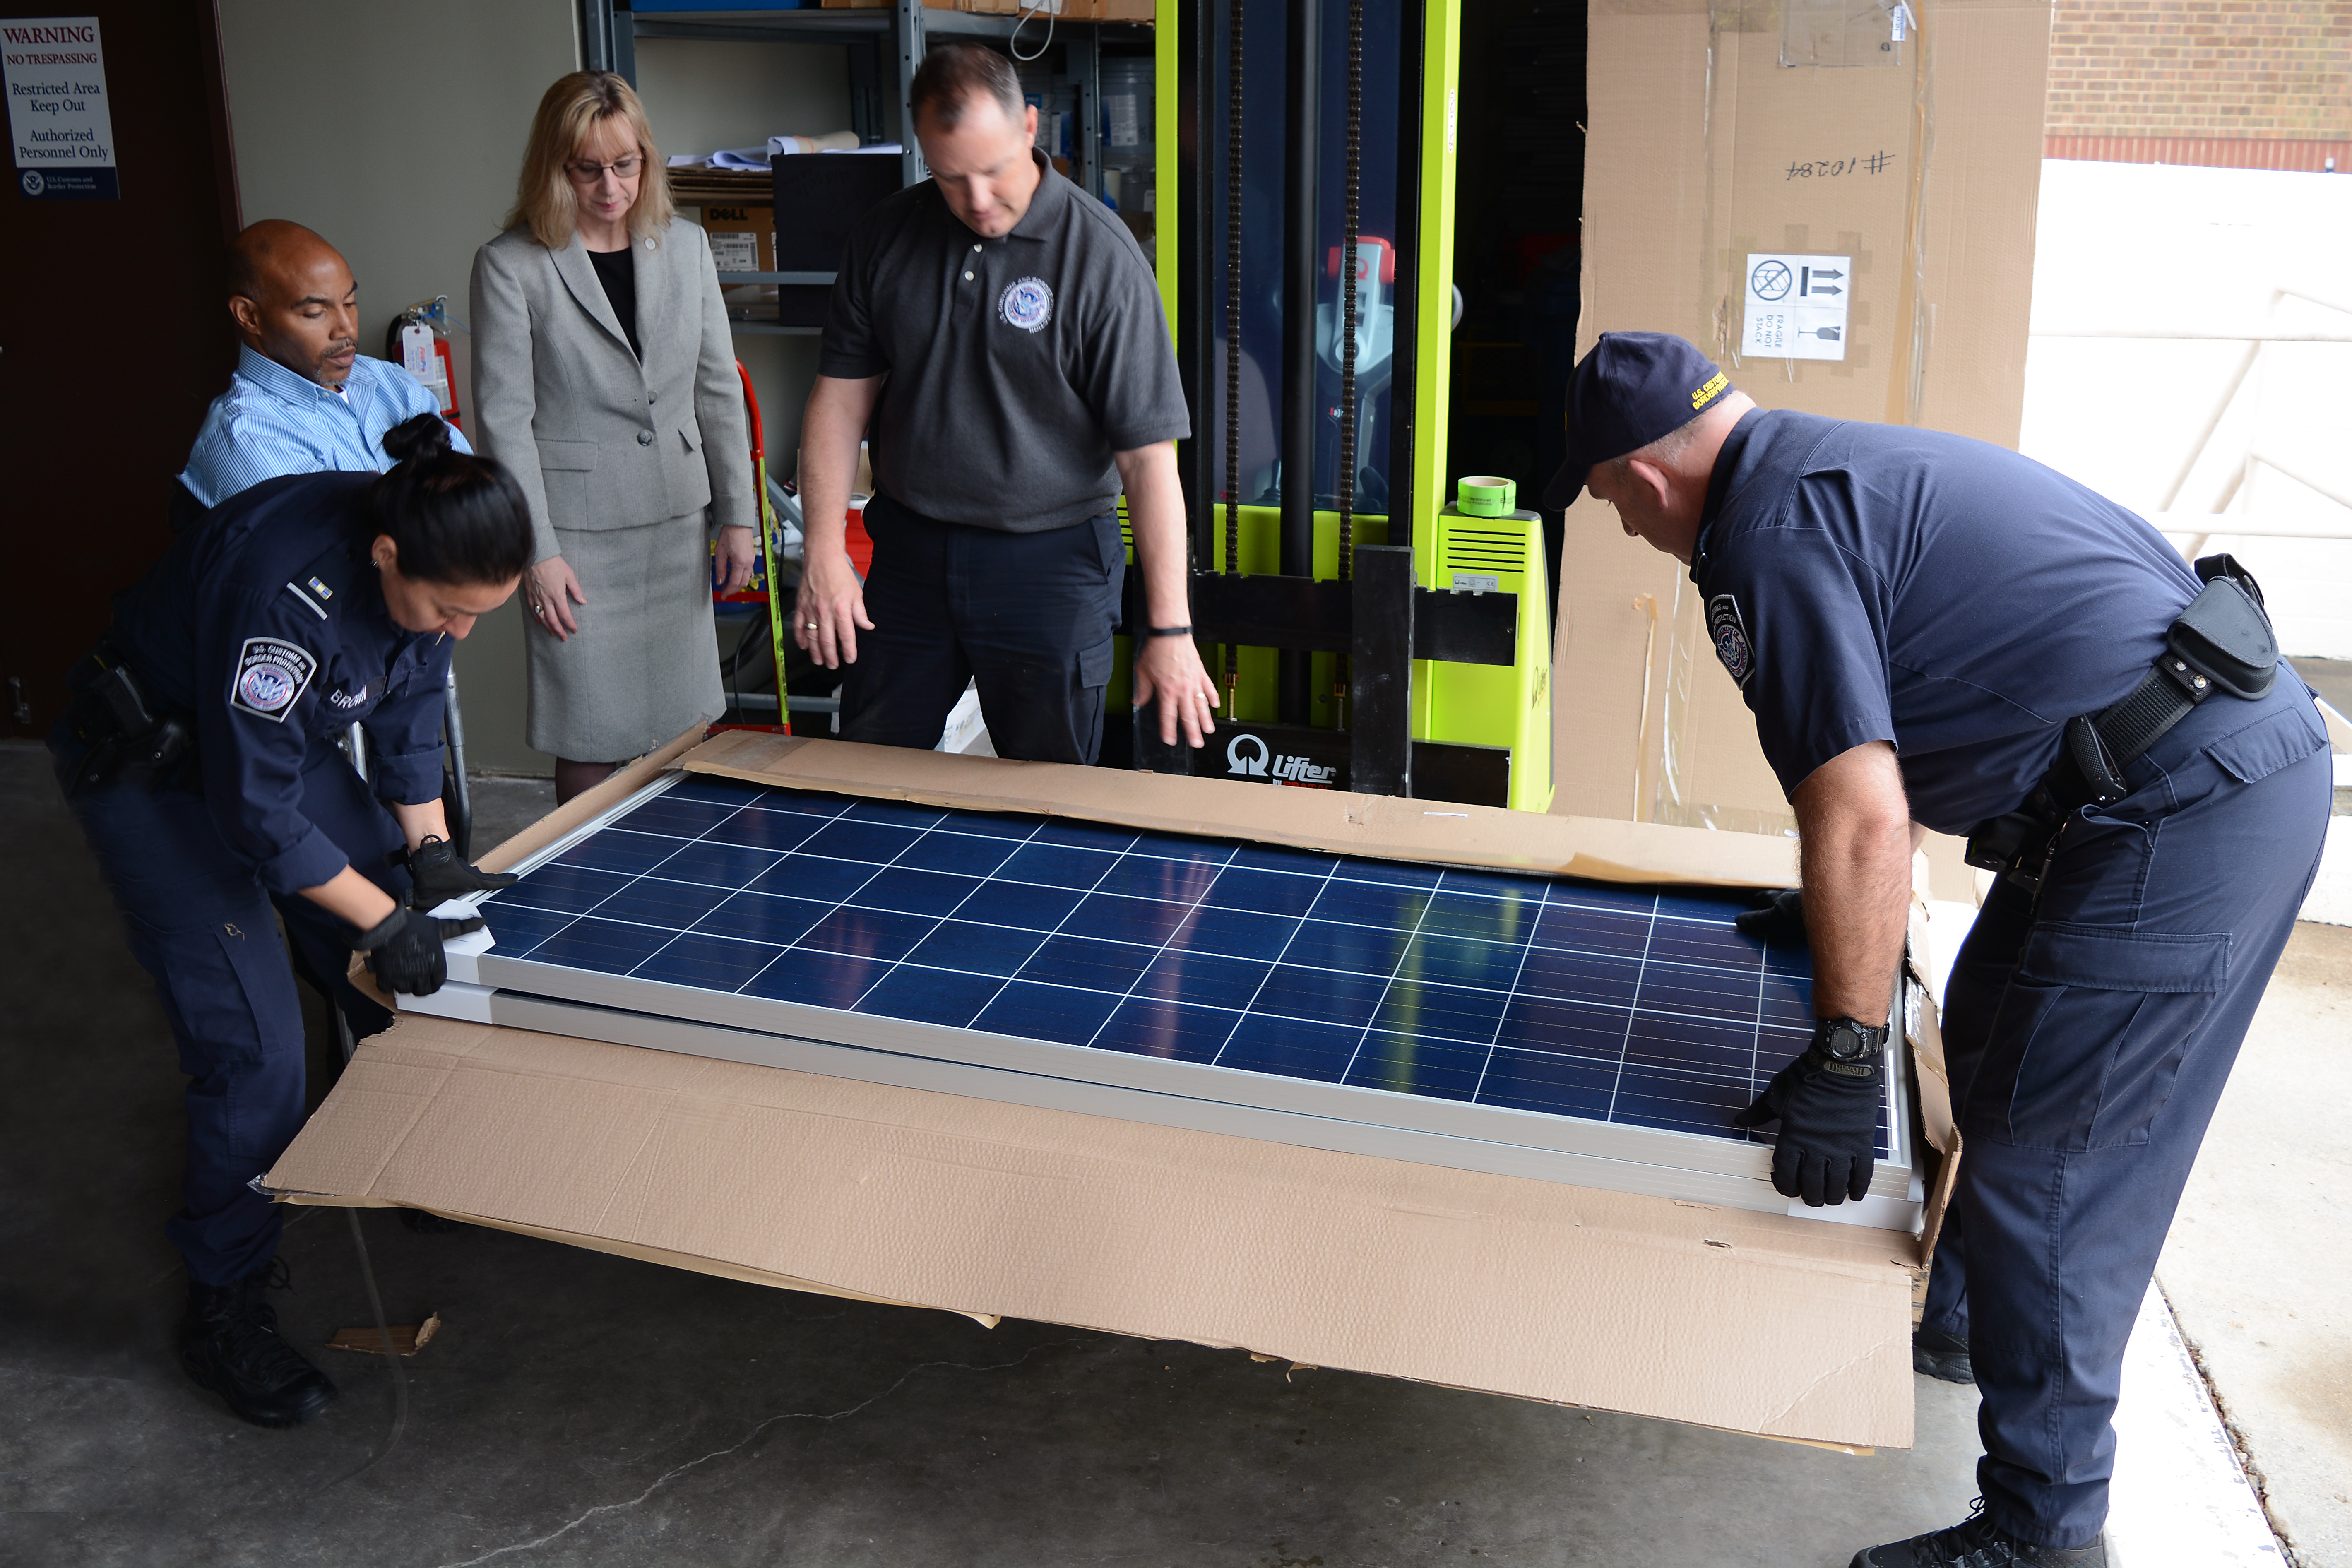 CBP Officers Joyce Brown and Robert Boswell lift a solar panel from its shipping carton as the import specialist team, Wilbert Jones, Laurie Pazzo and Jeff Sorrells, discuss sending a sample to the CBP lab. Photo by Scott Sams